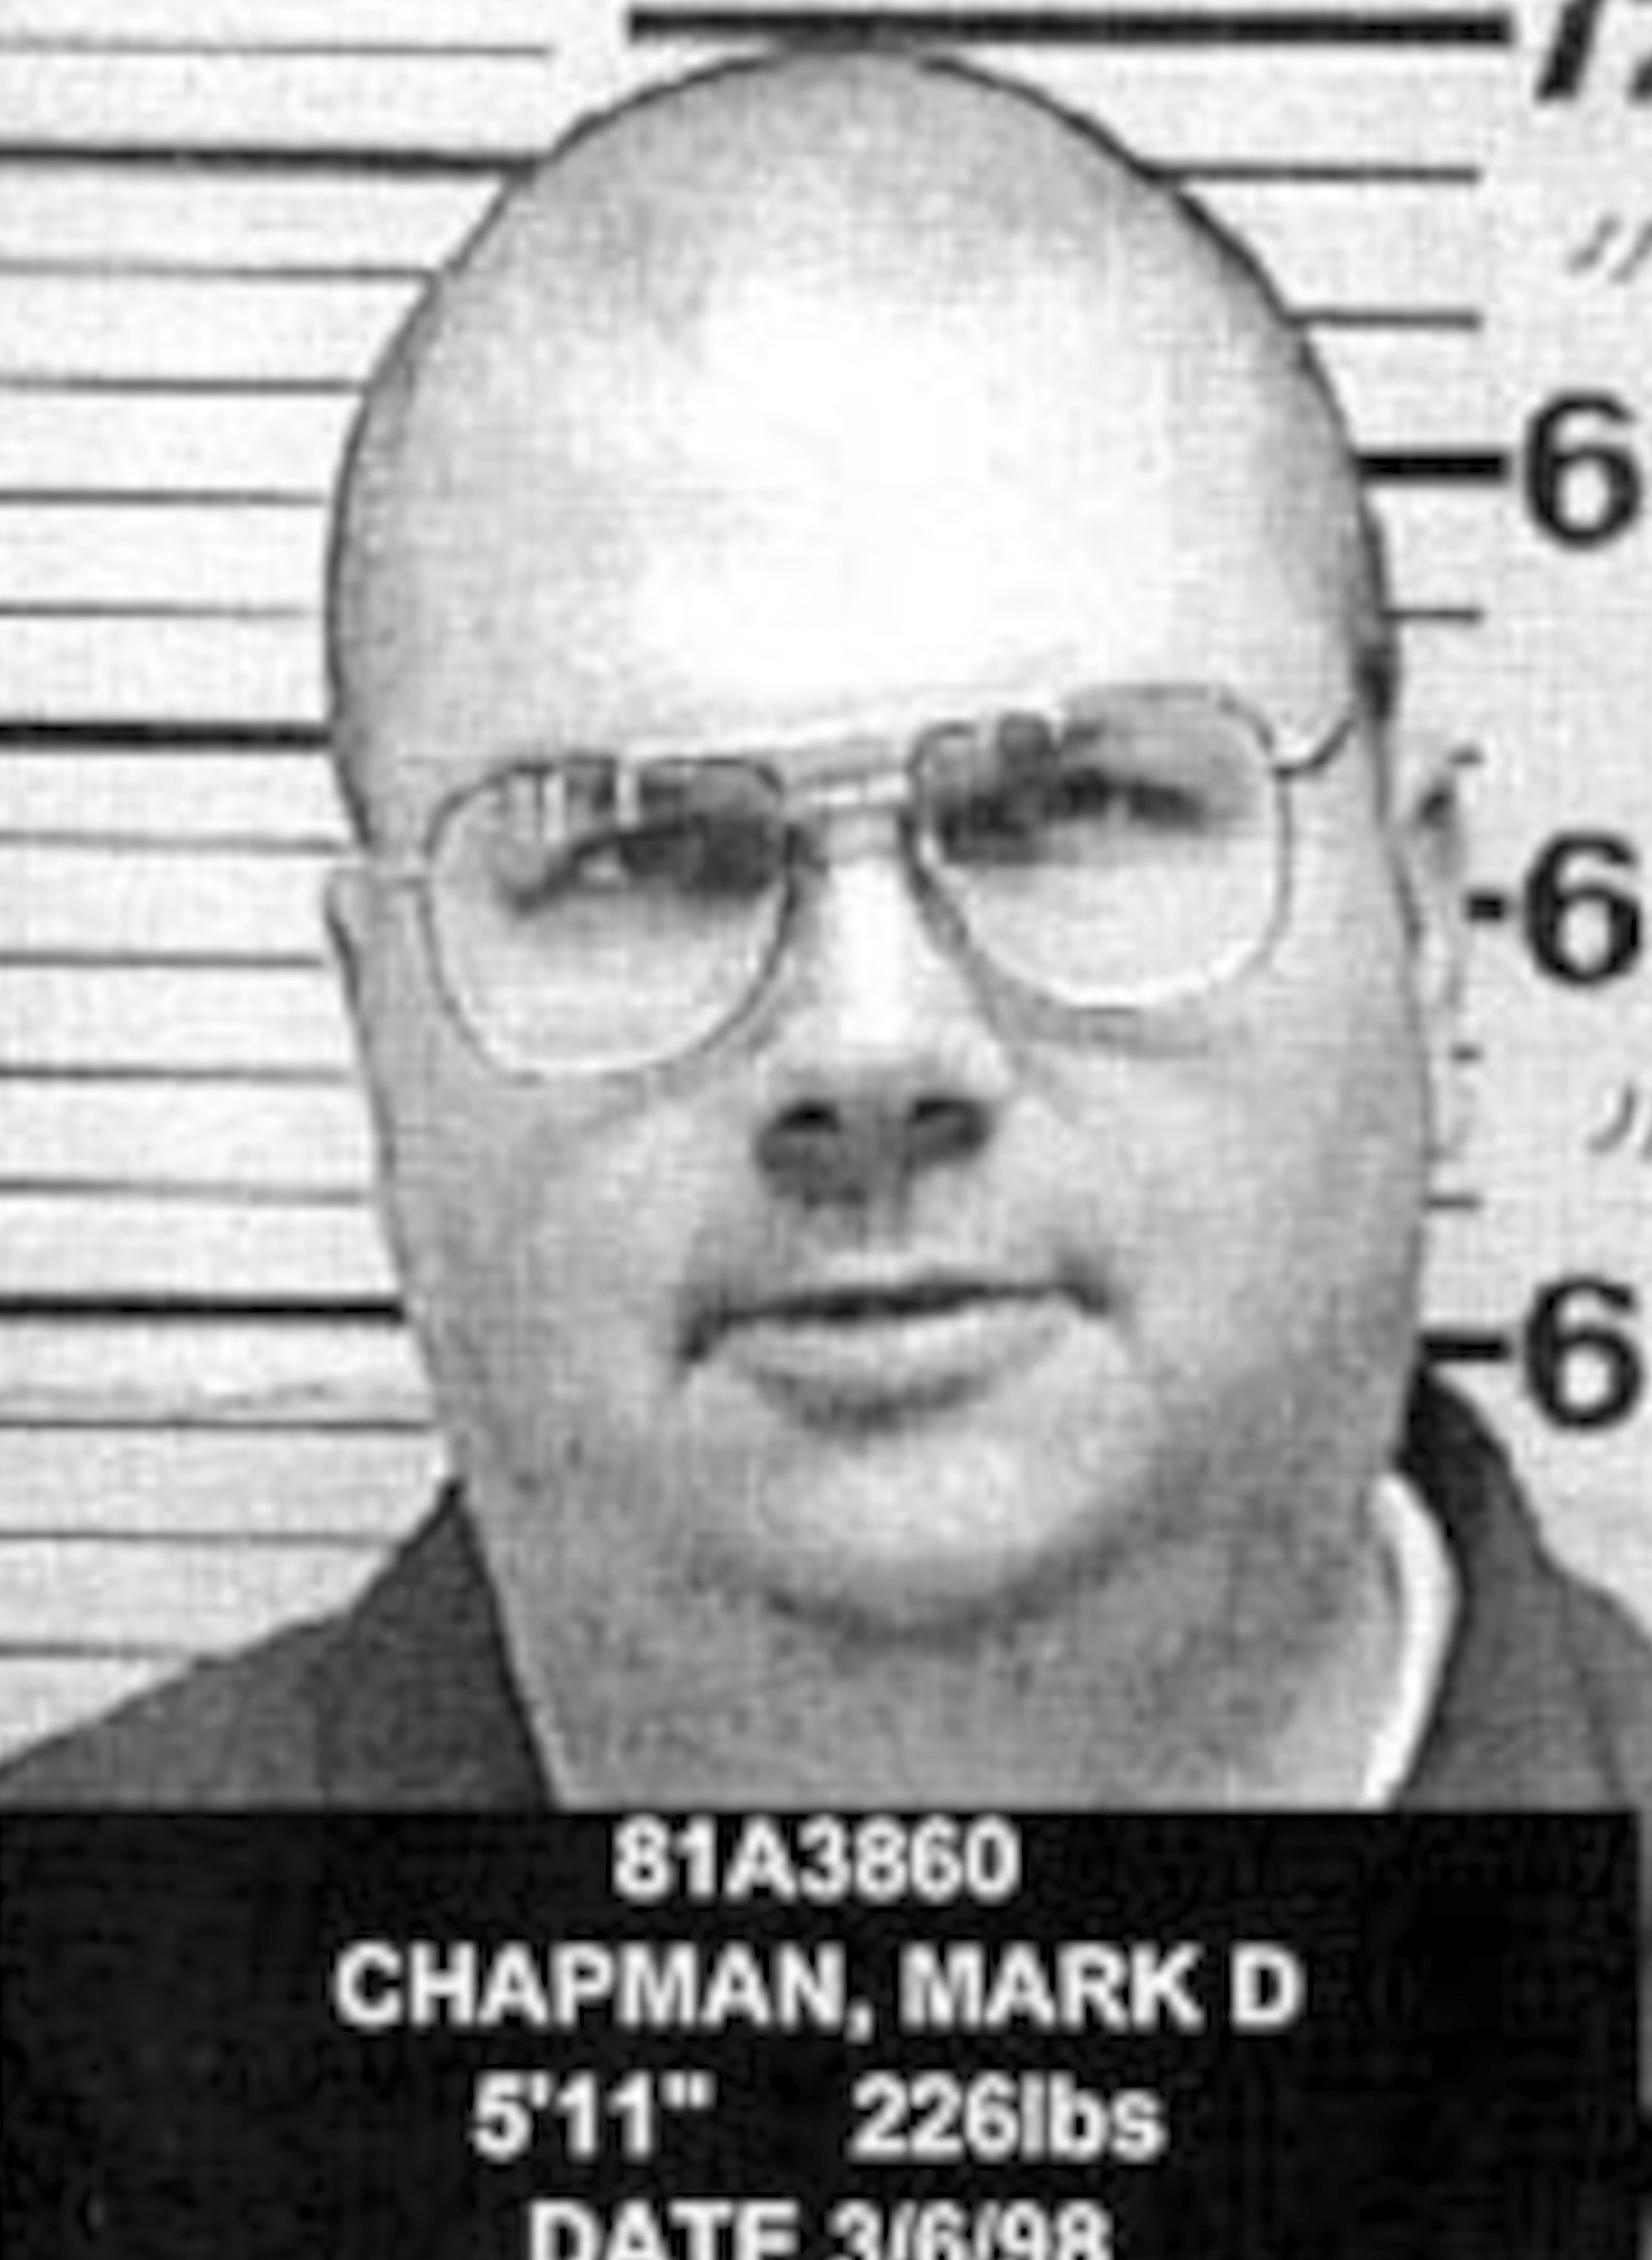 Mark David Chapman in a mug shot at the New York State Department of Correctional Services, US, March 1998. | Source: Getty Images.